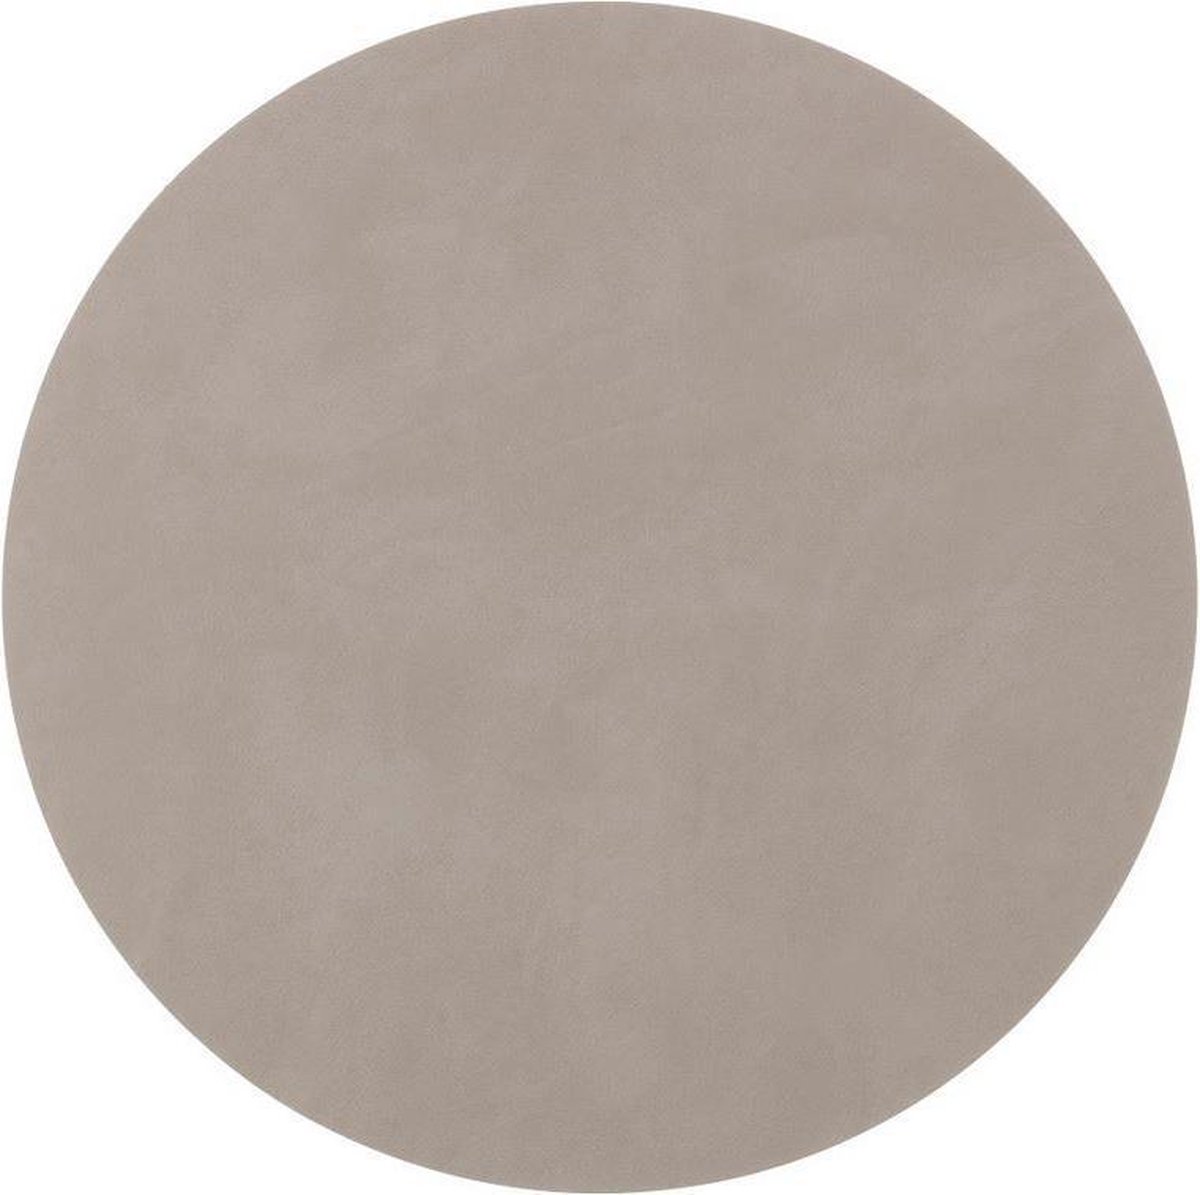 Lind Nupo placemat round 40cm light grey